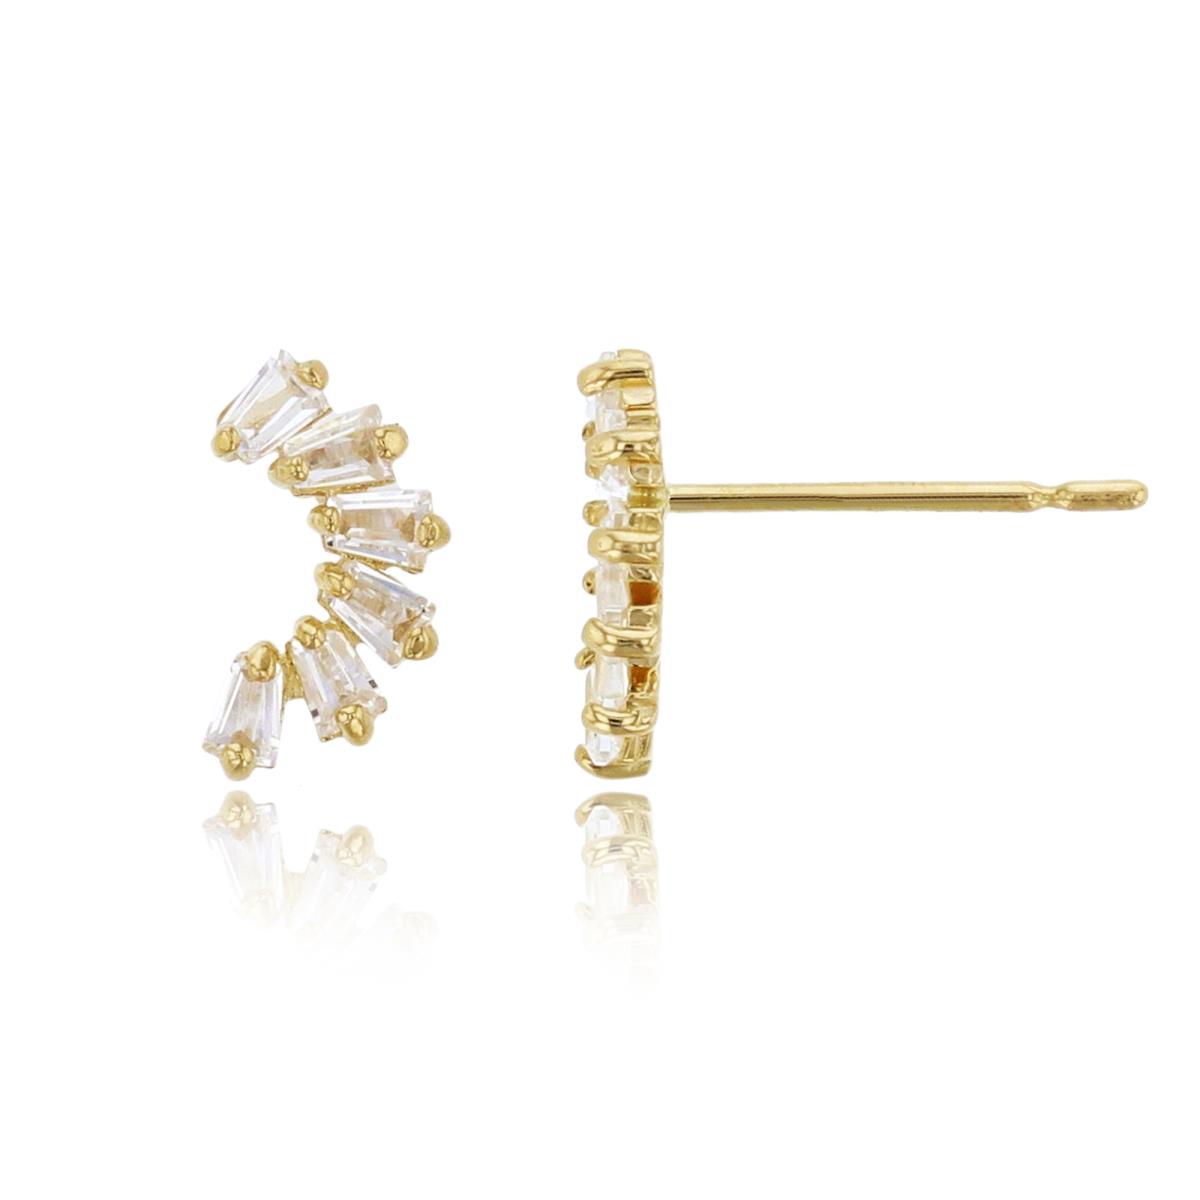 10K Yellow Gold 8x4mm Baguette CZ Curved Stud Earring